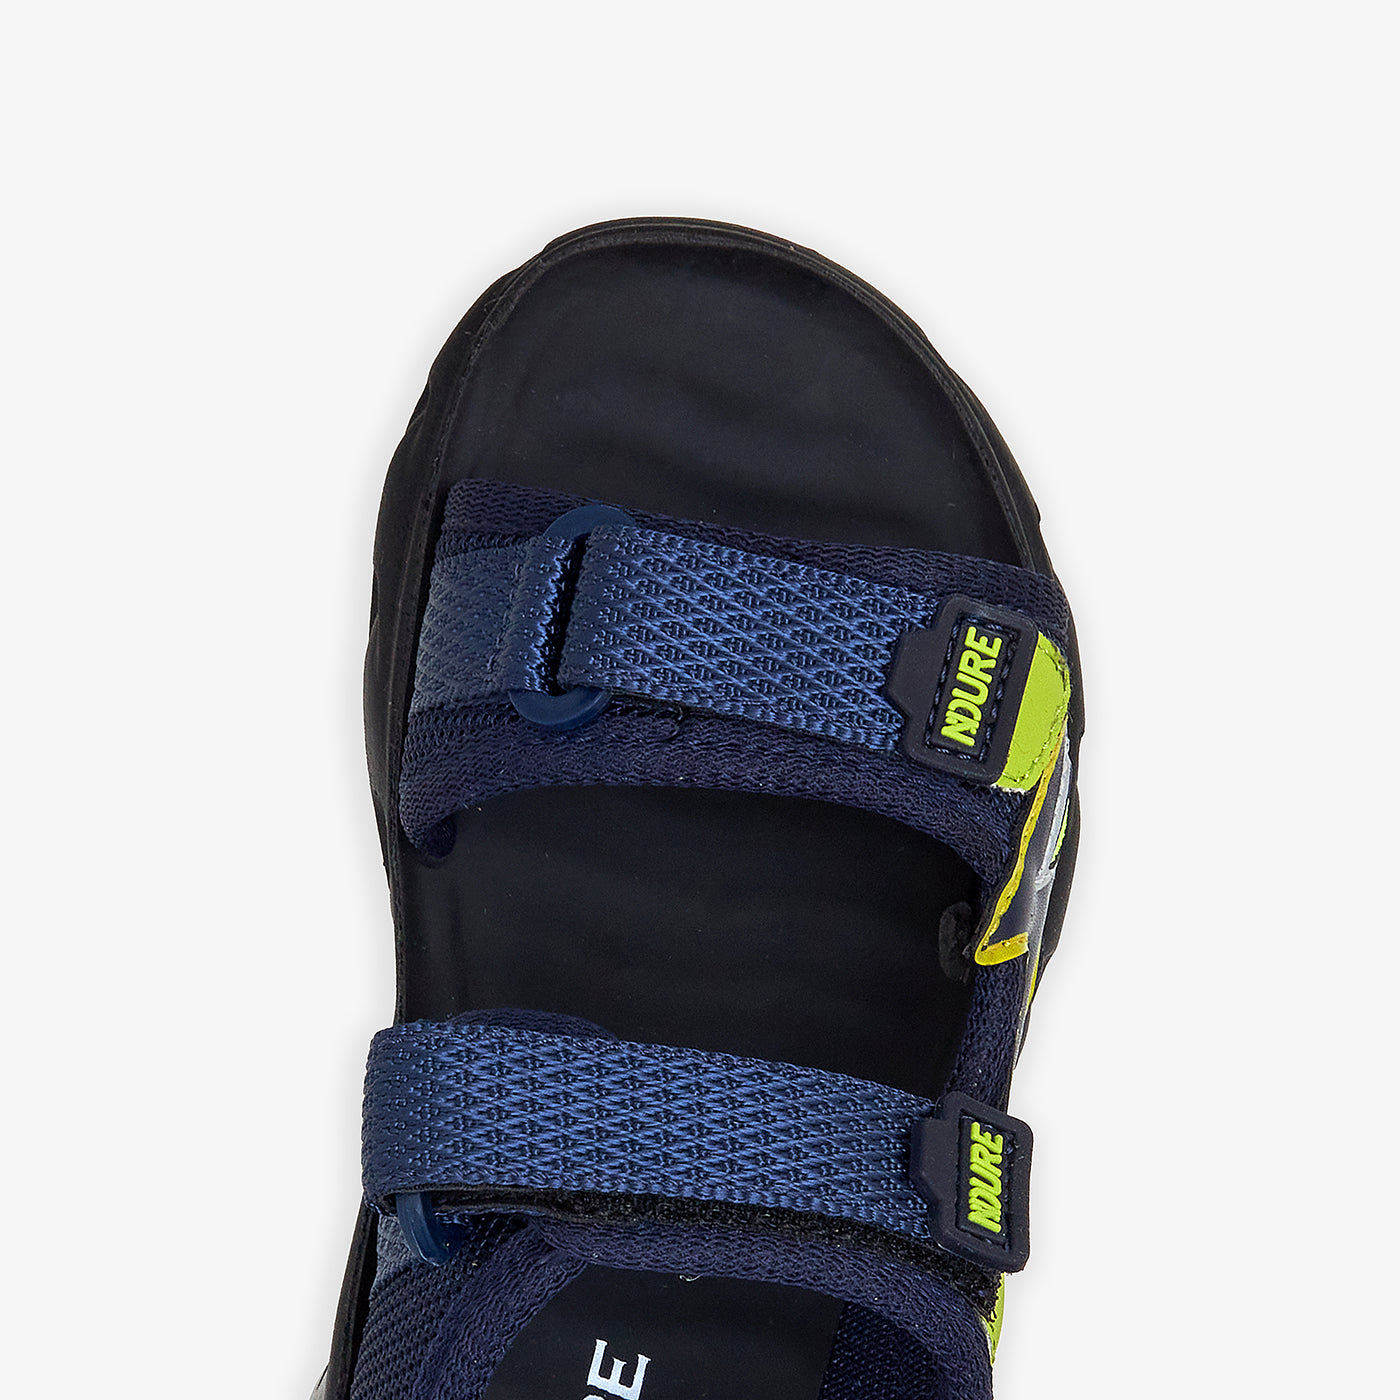 Active Play Sandals for Boys